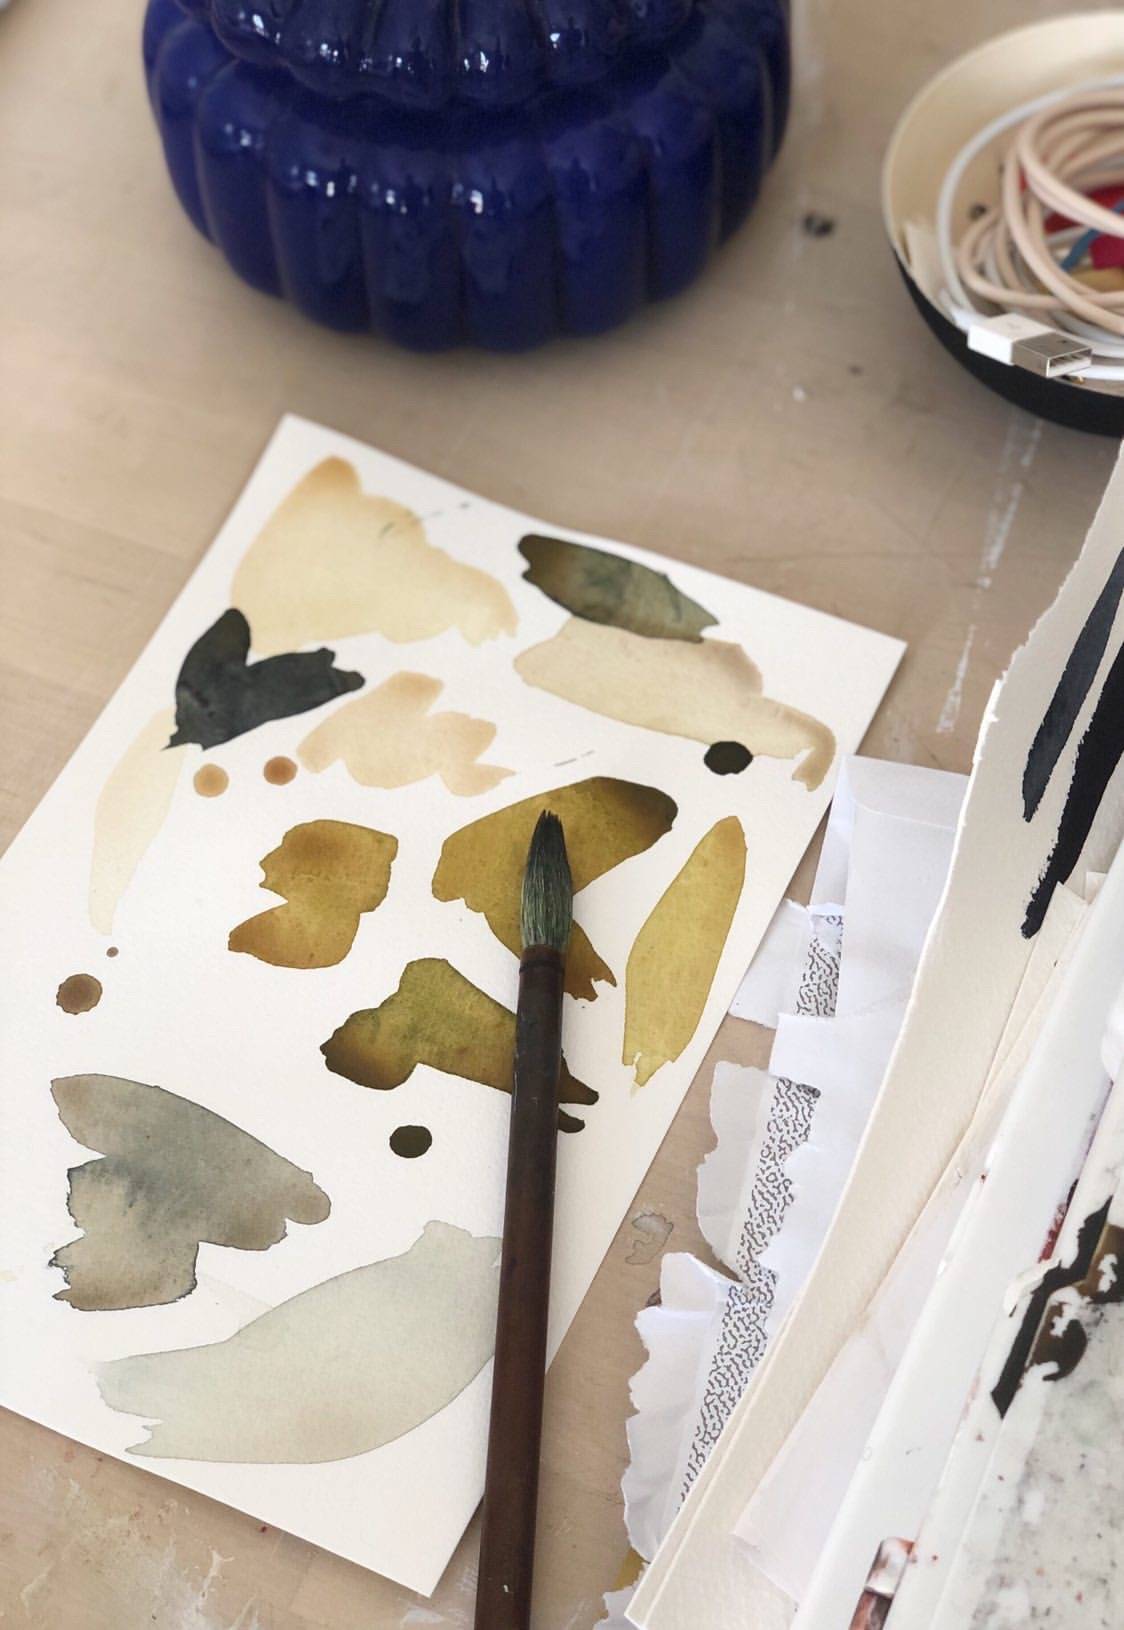 A sheet of paper shows experimental watercolor strokes. 